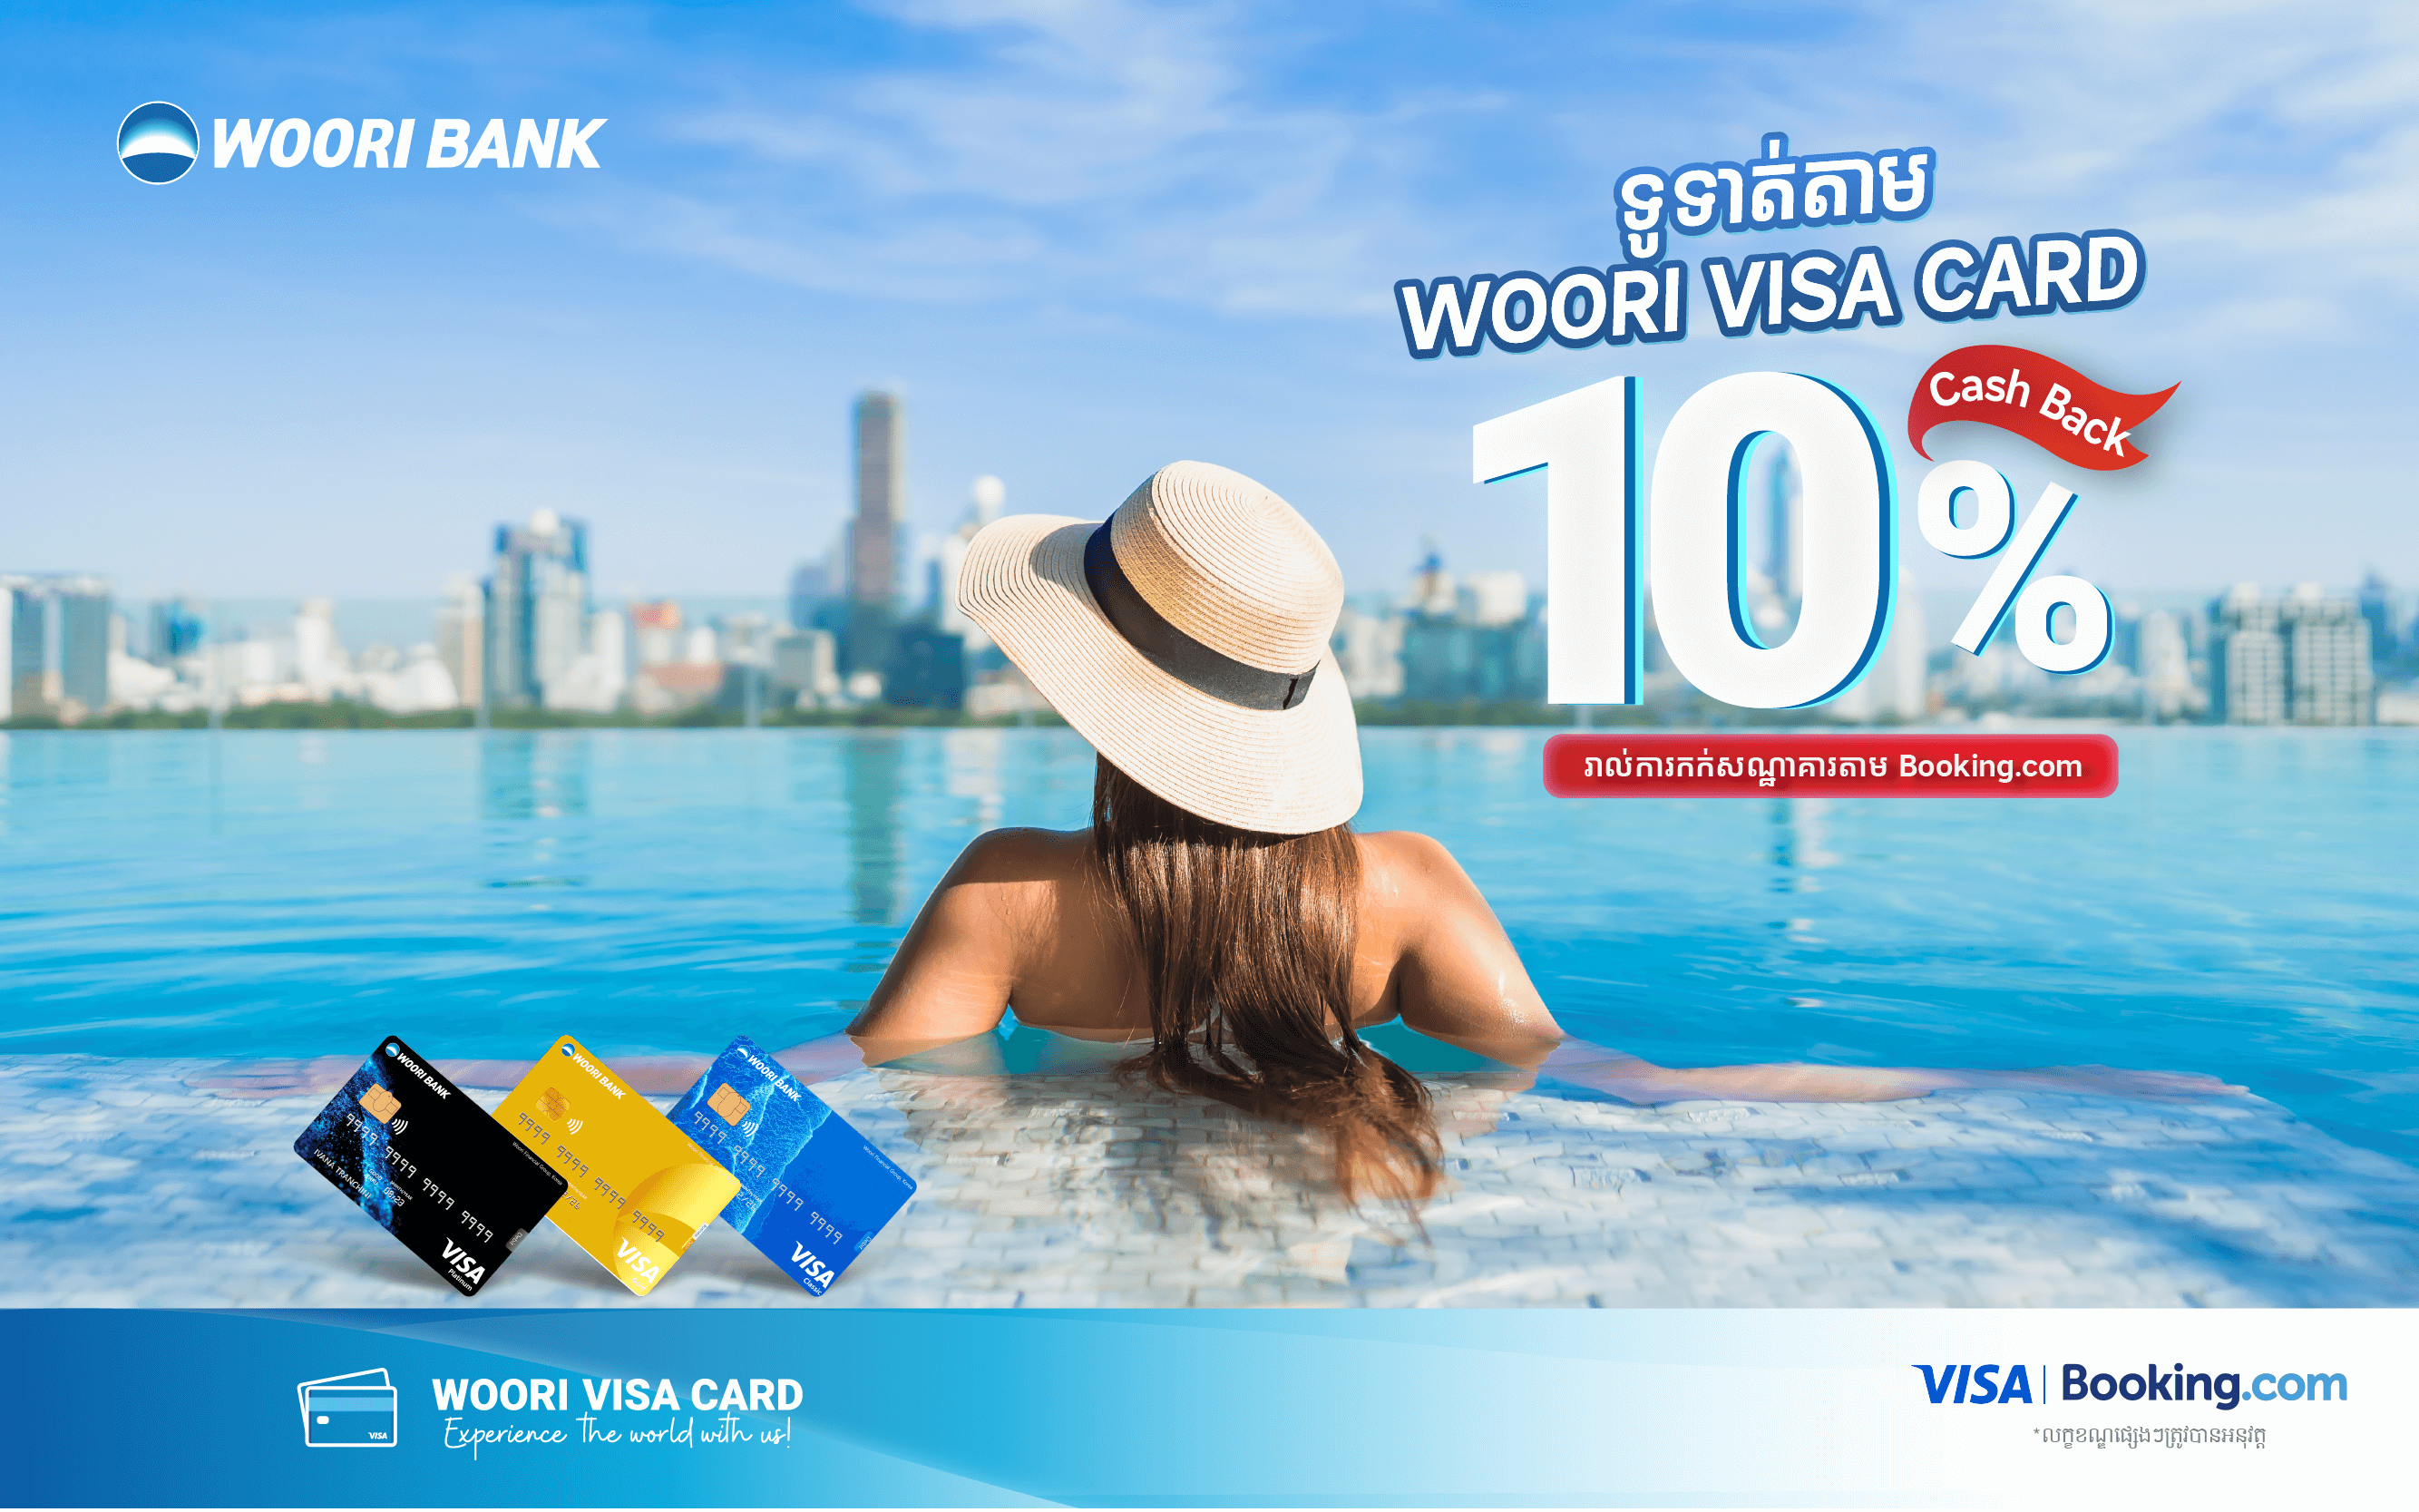 Get up to 10% cashback on accommodation bookings with Woori Visa Card.